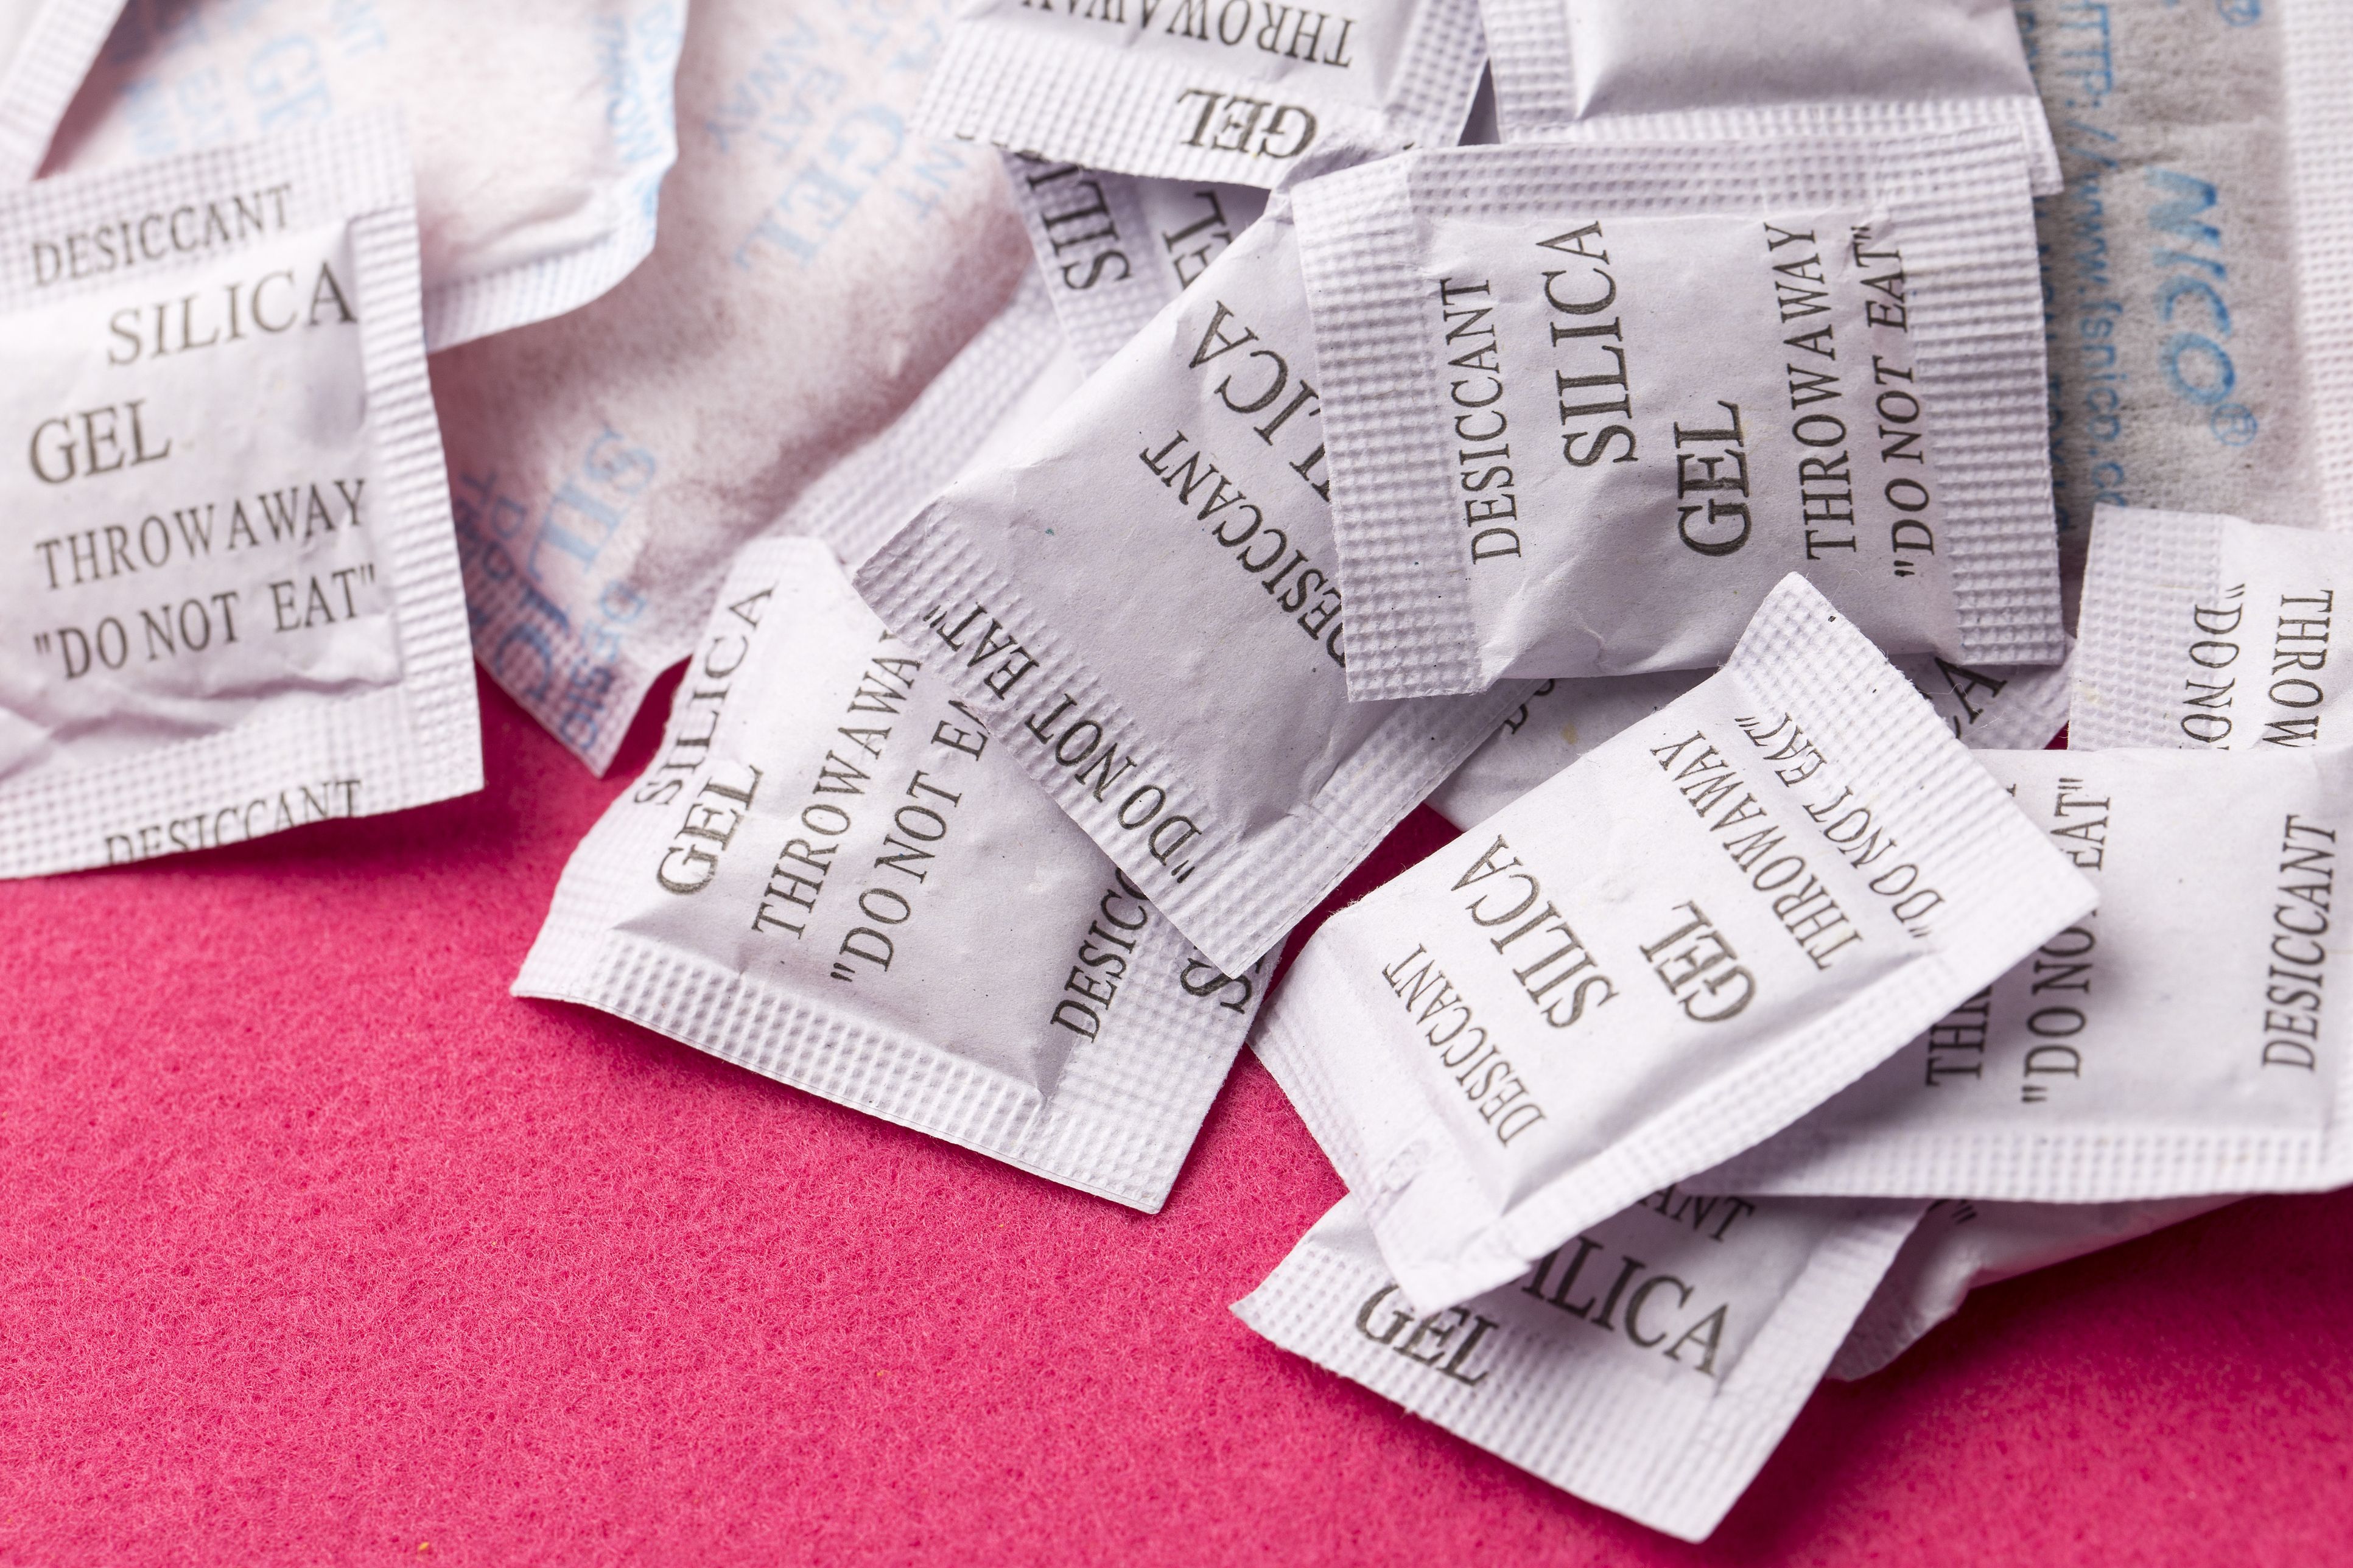 What happens if you accidentally EAT a silica gel packet? We tell